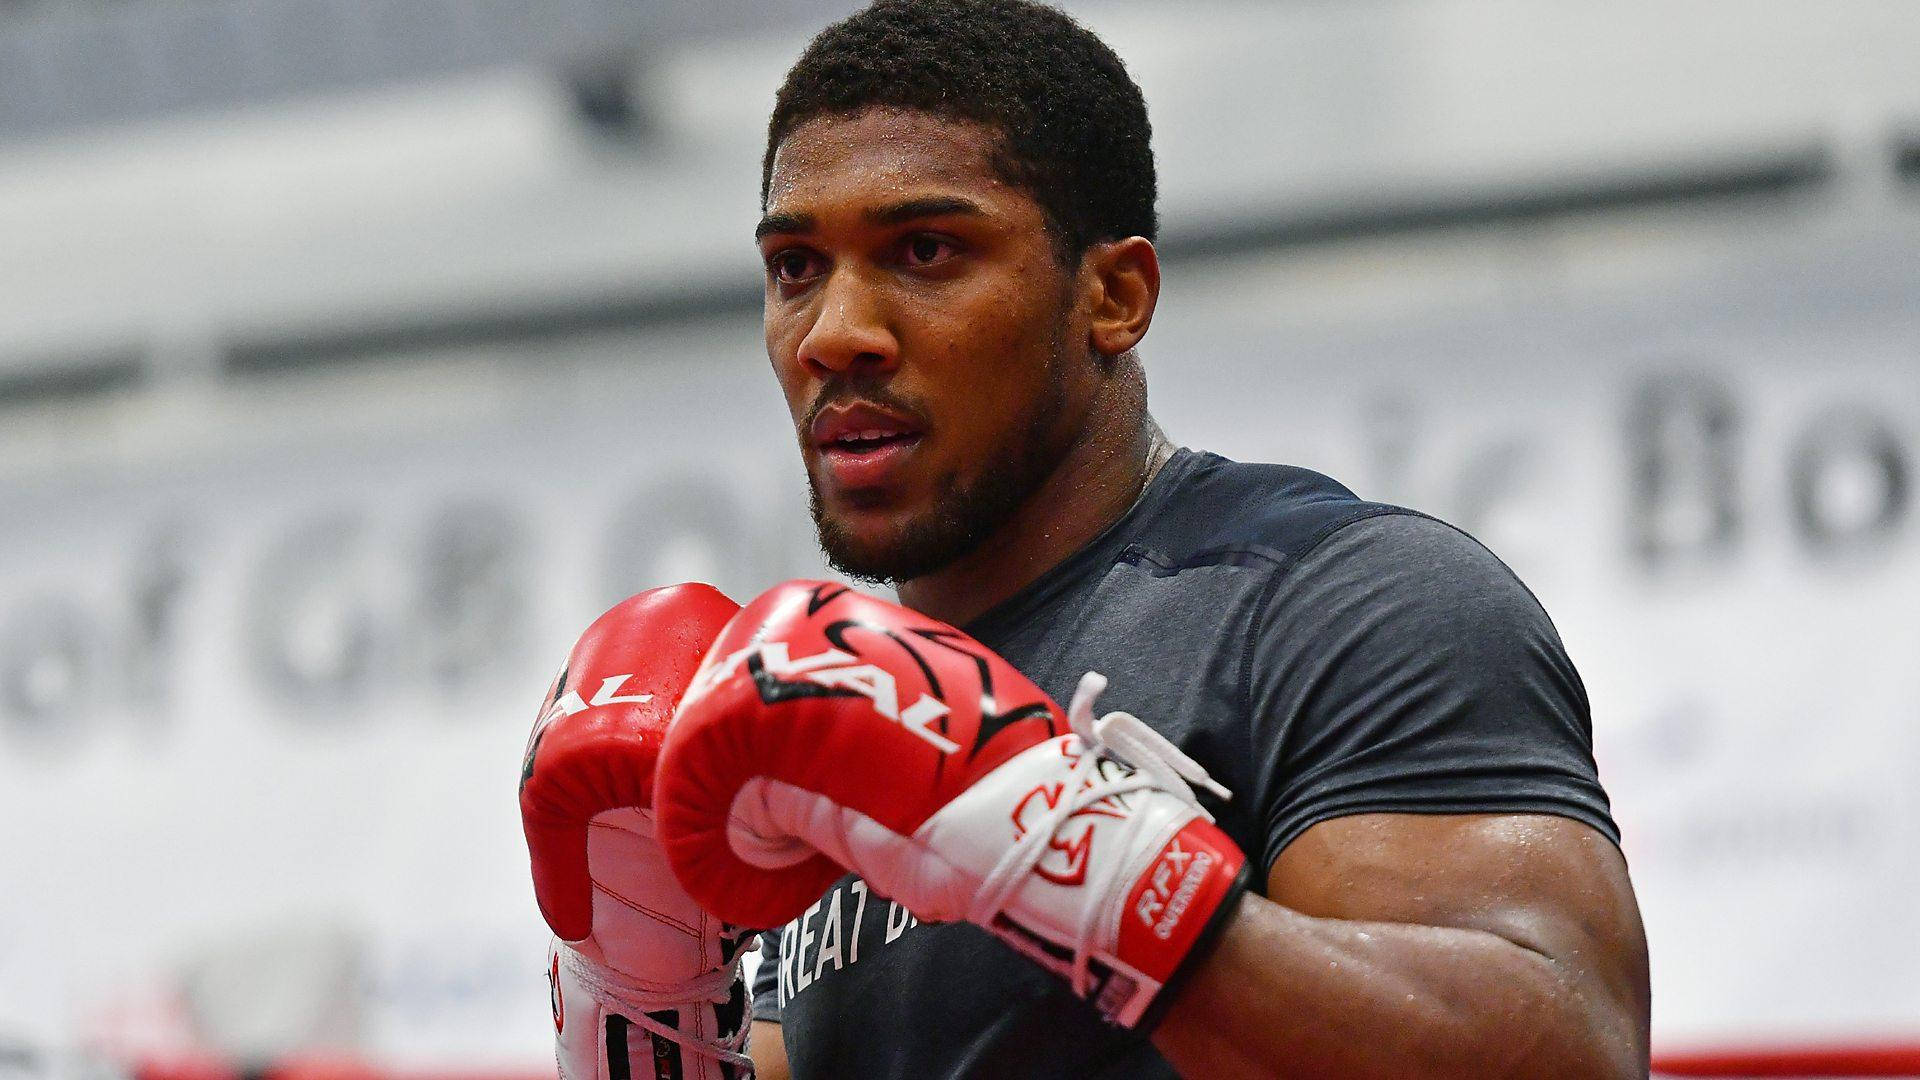 Anthonyjoshua Rote Boxhandschuhe Wallpaper